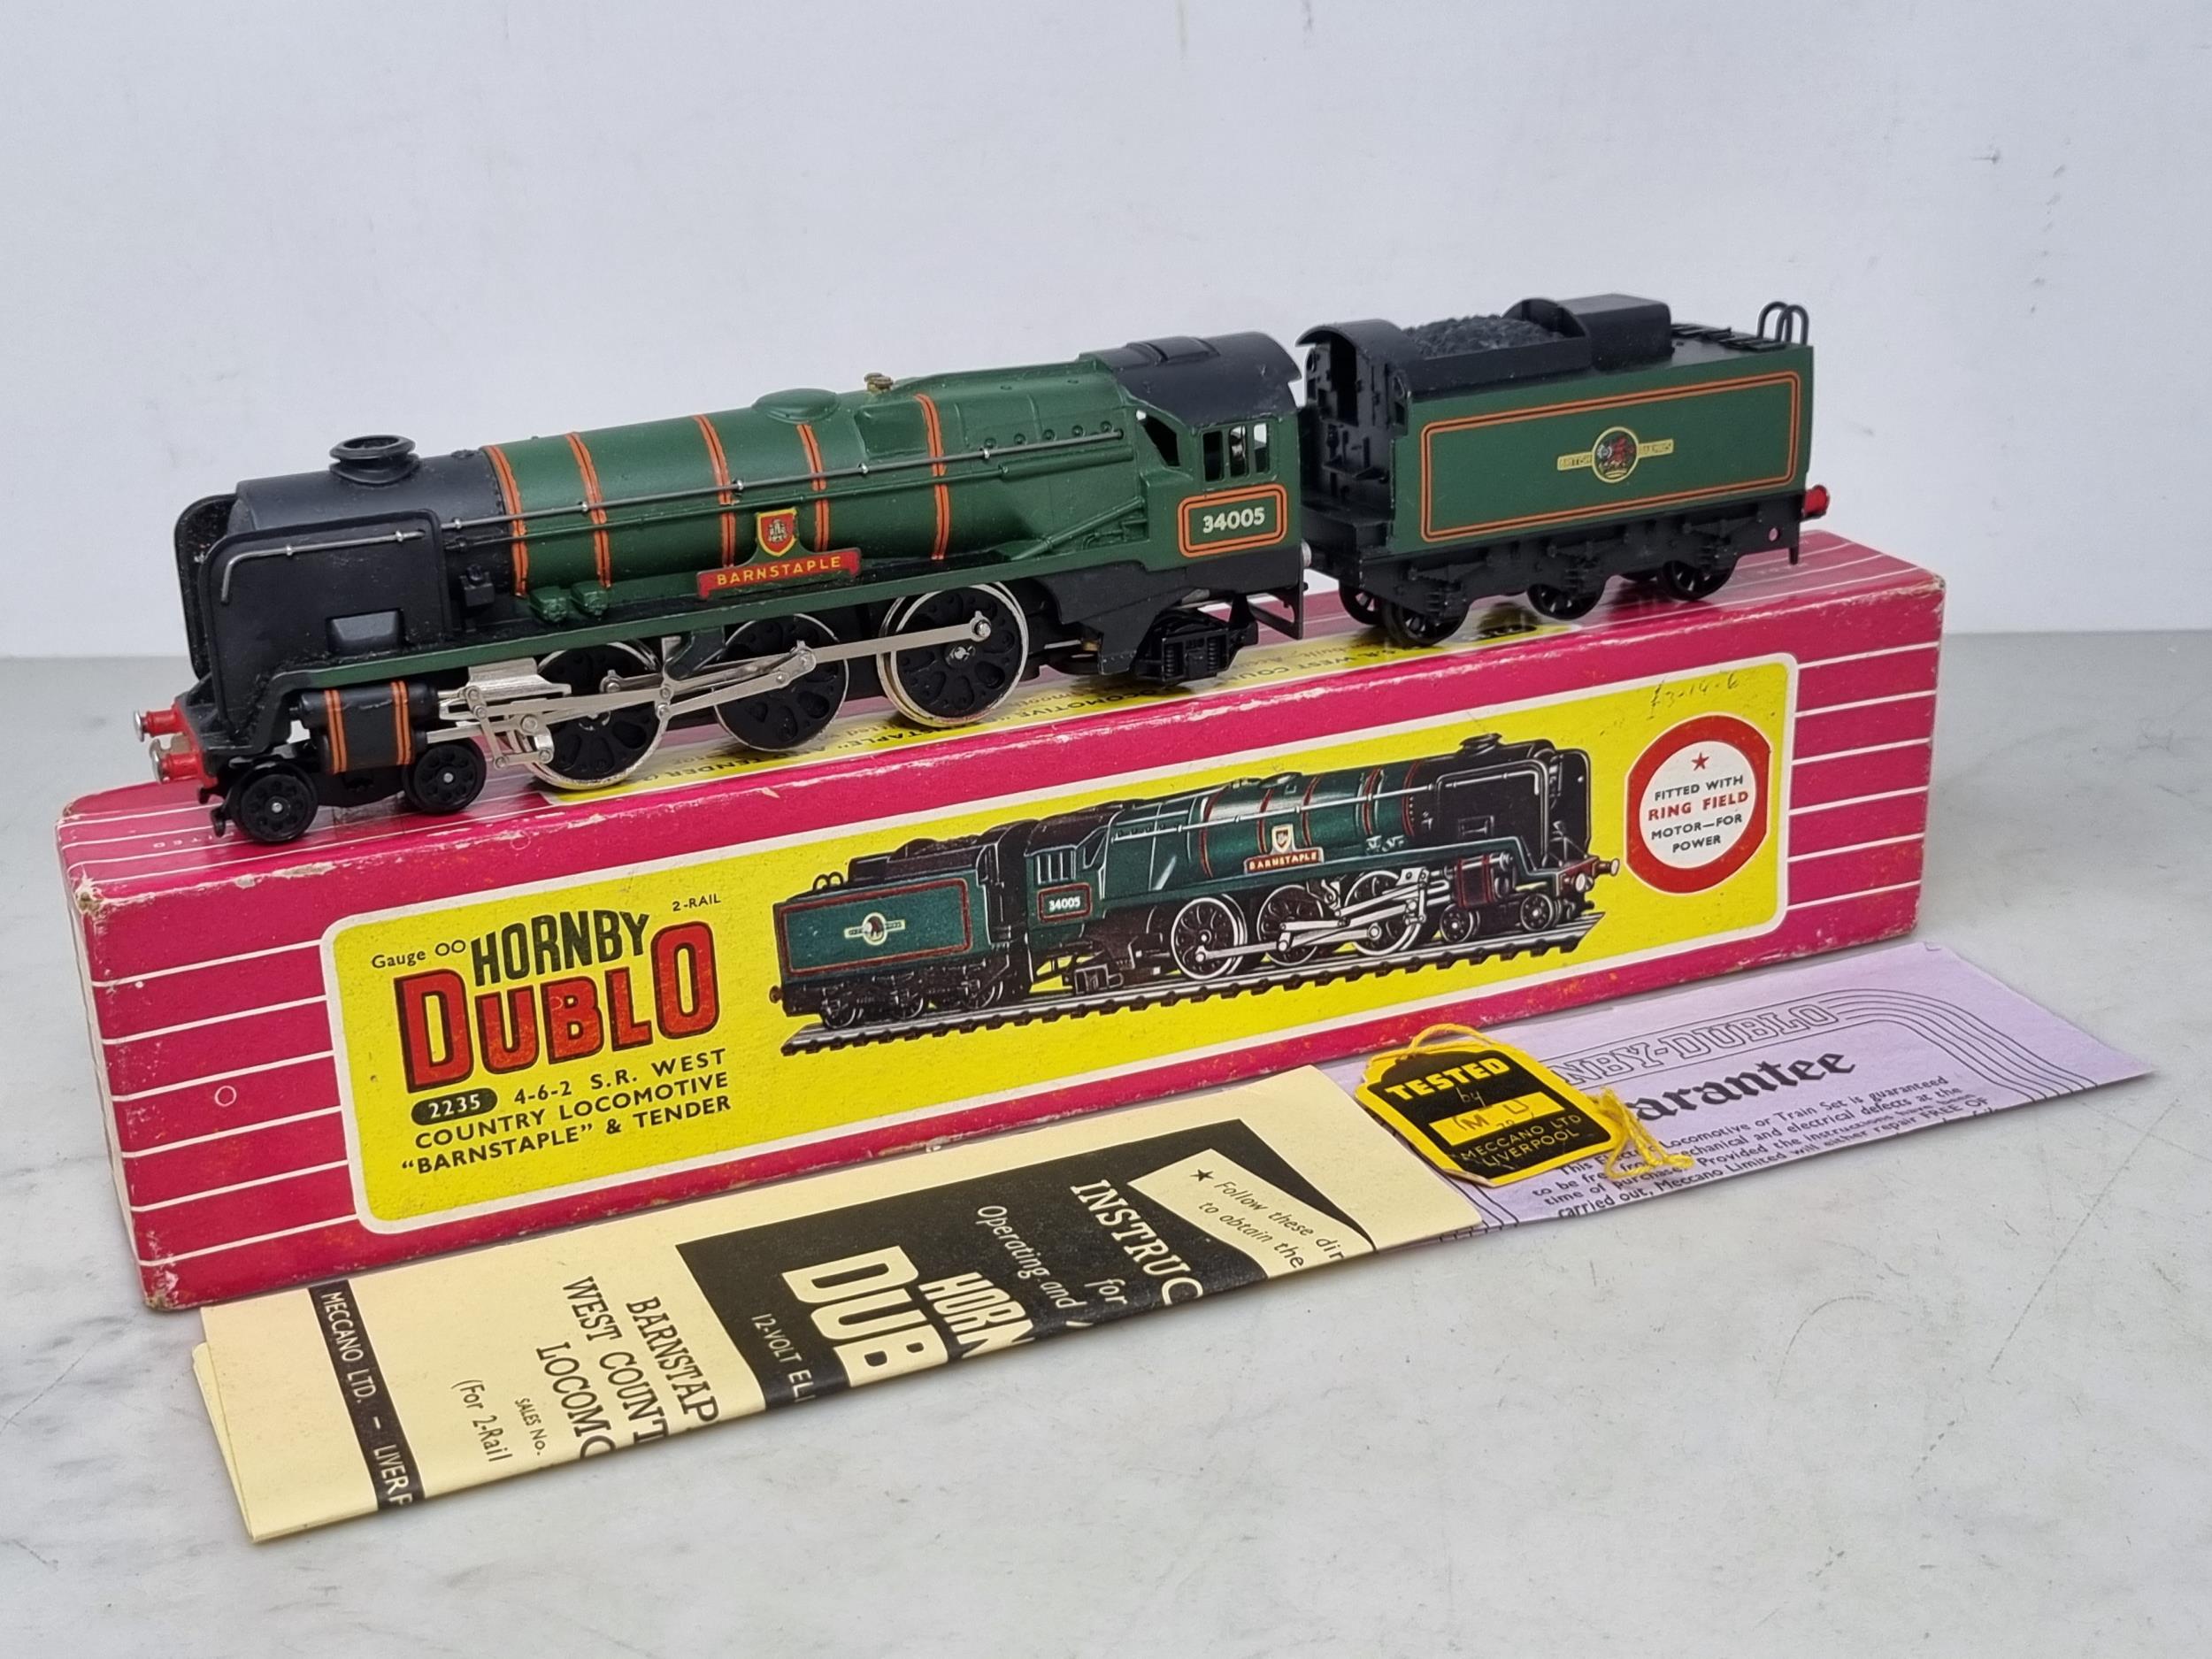 A boxed Hornby Dublo 2235 'Barnstaple' Locomotive, unused in mint condition. Box is in excellent